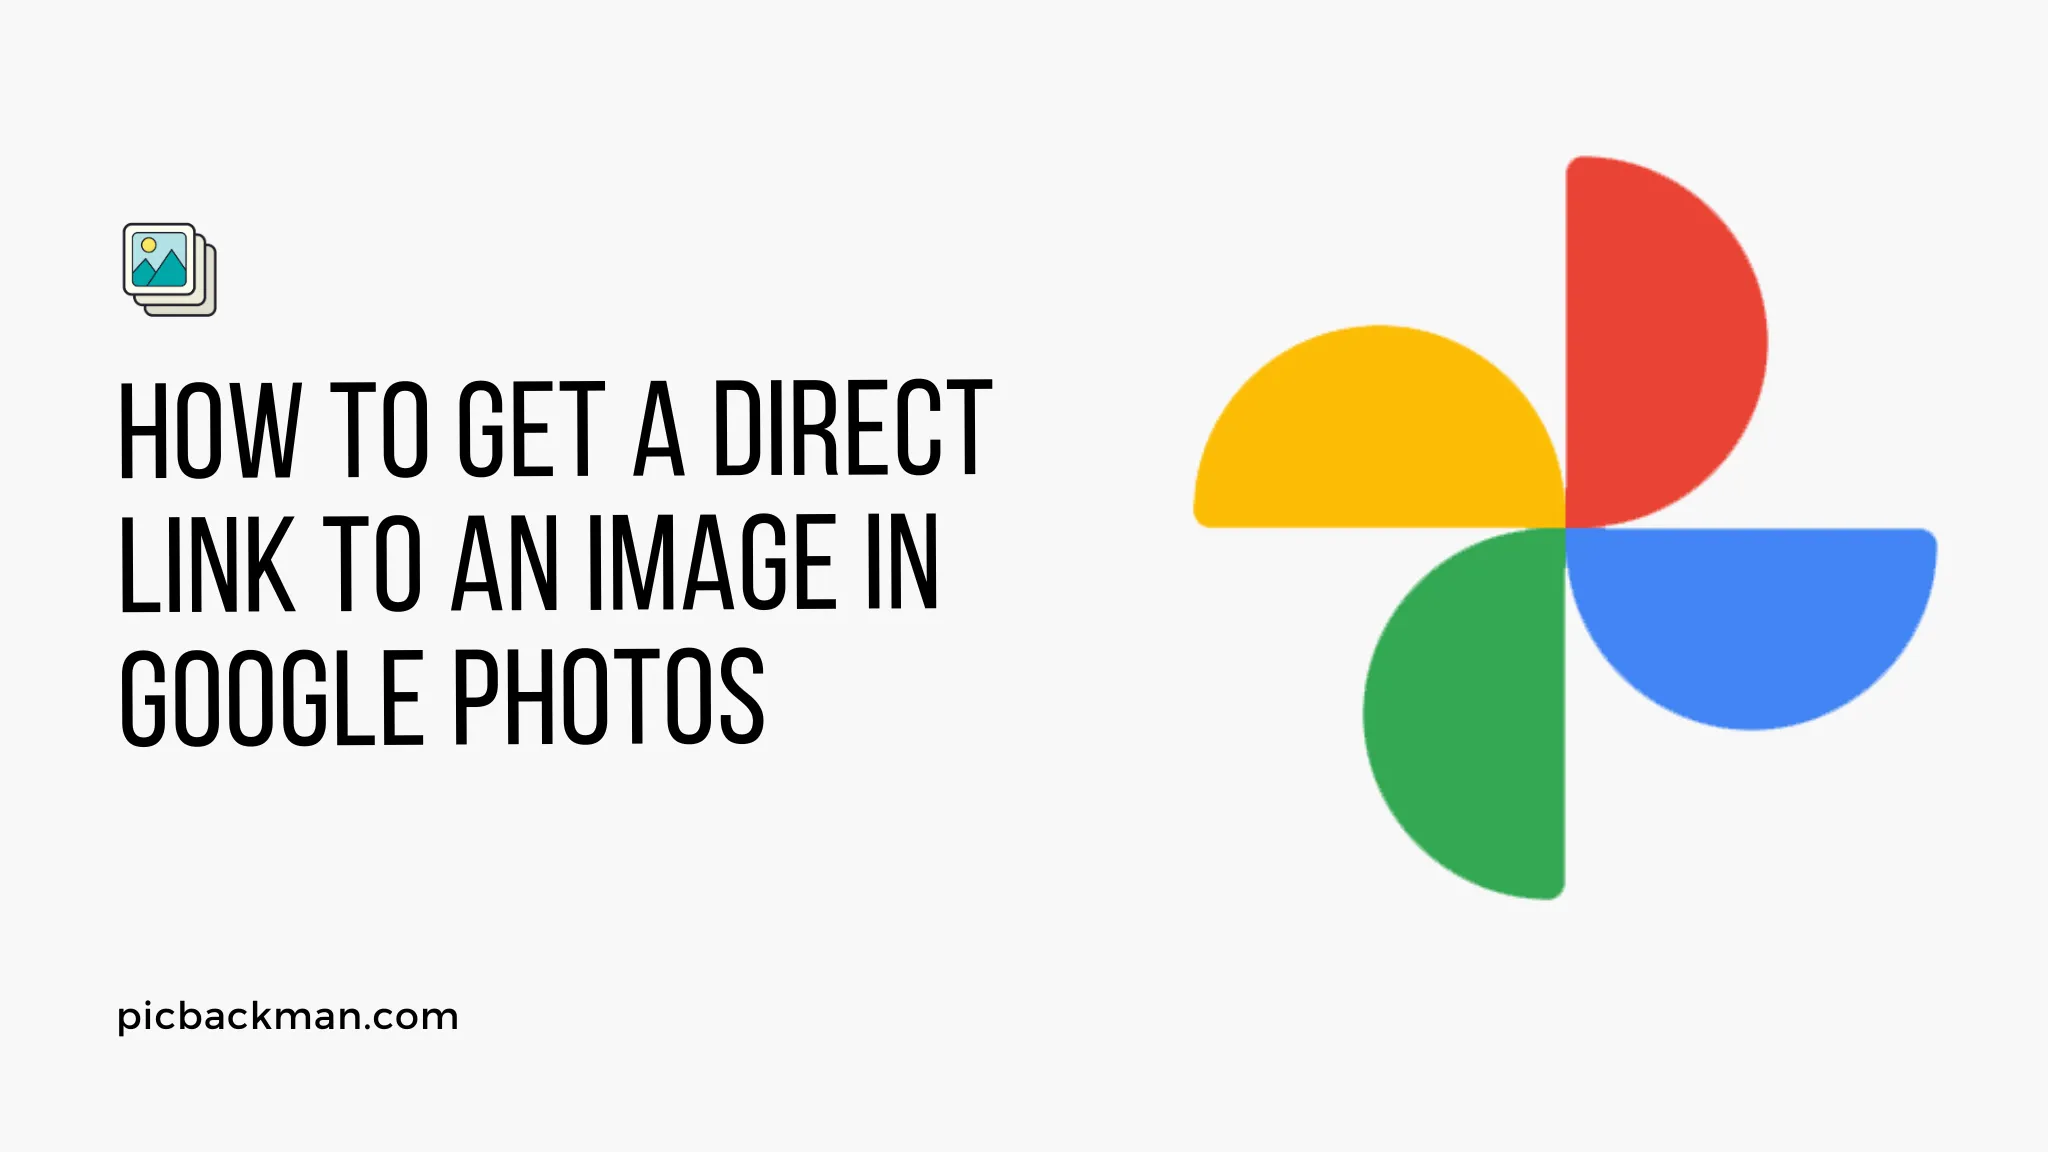 How to get a direct link to an image in Google Photos?